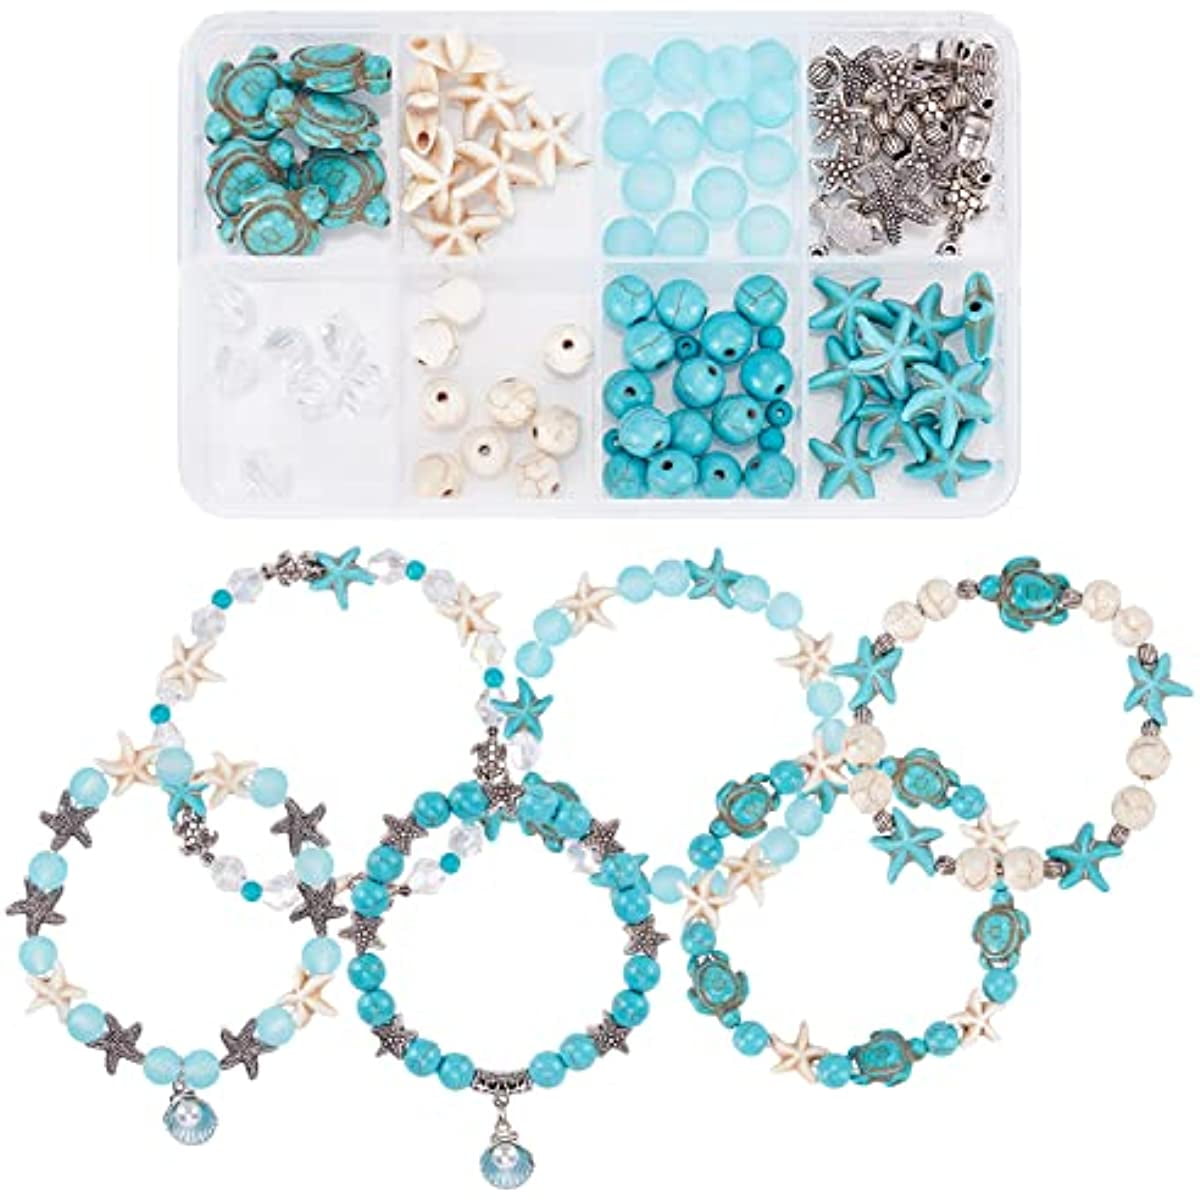 8mm Round Beads Bracelet Making Kit Beads, Bracelet Beads Marble Loose  Beads Turquoise Turtle Starfish for Women Bracelet Earring Necklace Jewelry